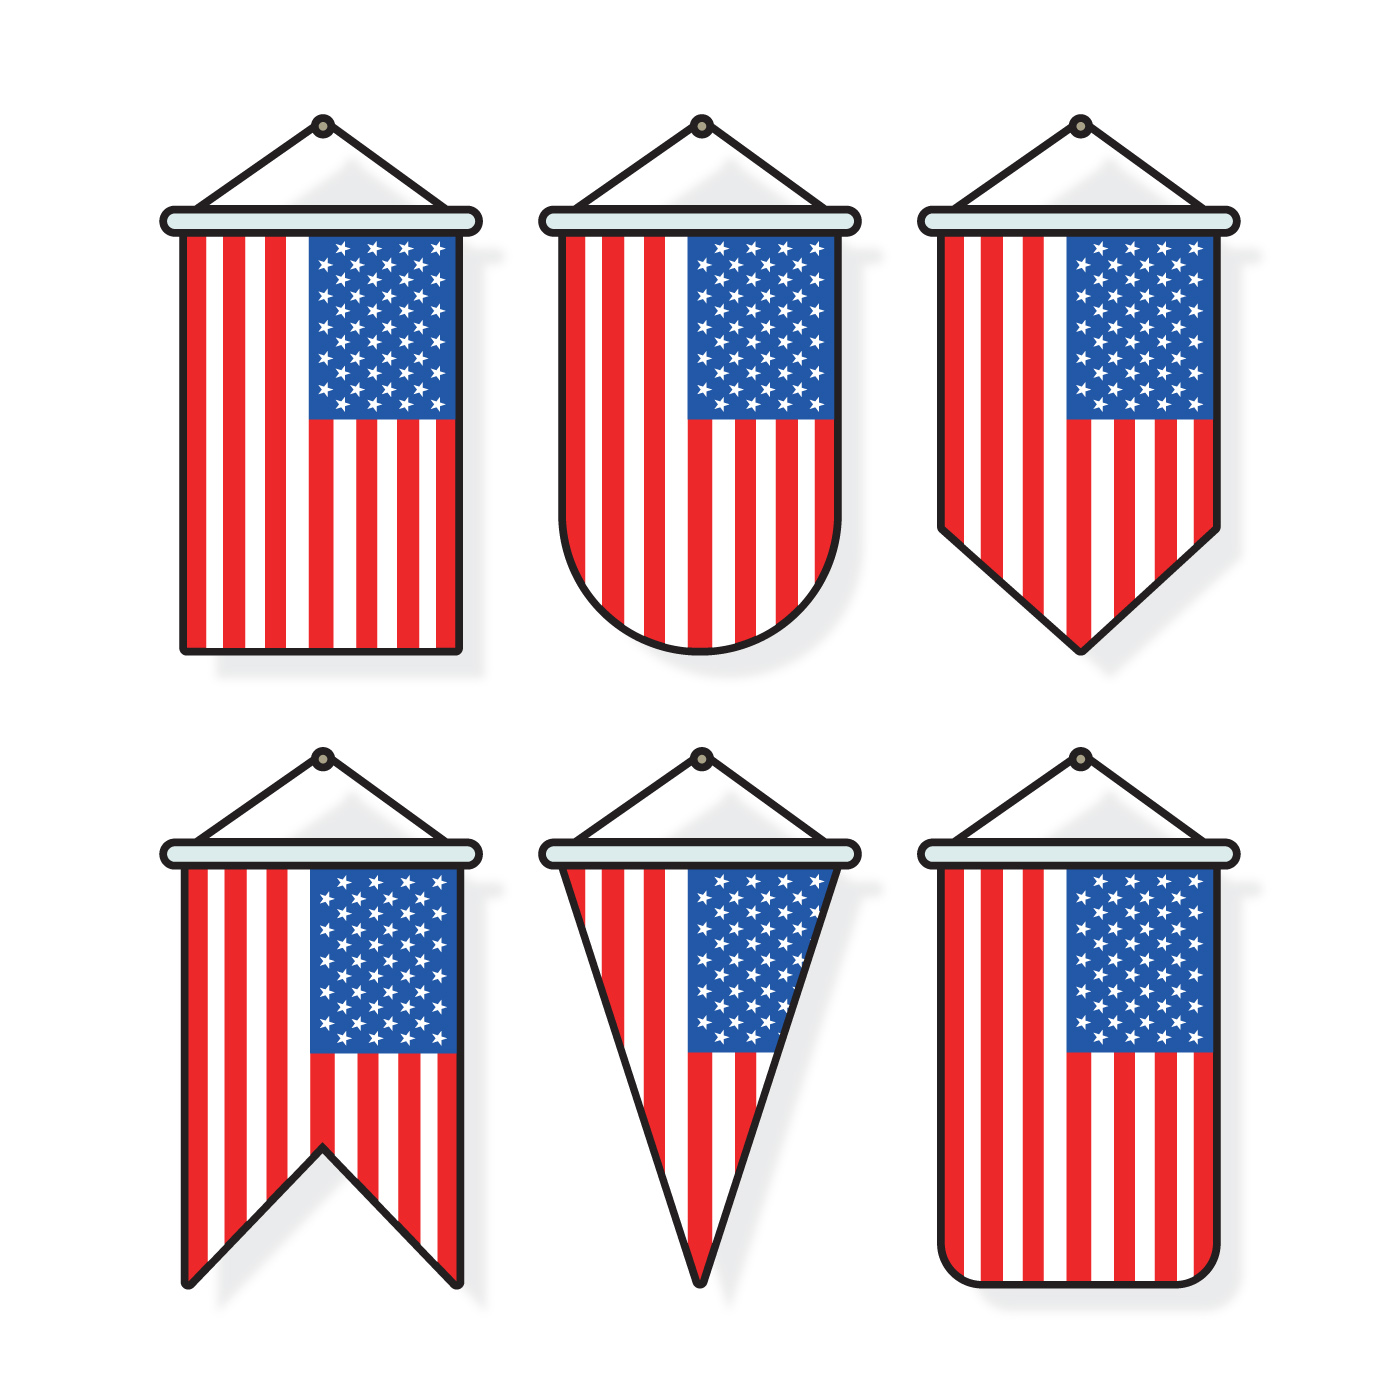 Download American Flag Outline Free Vector Art - (30 Free Downloads)